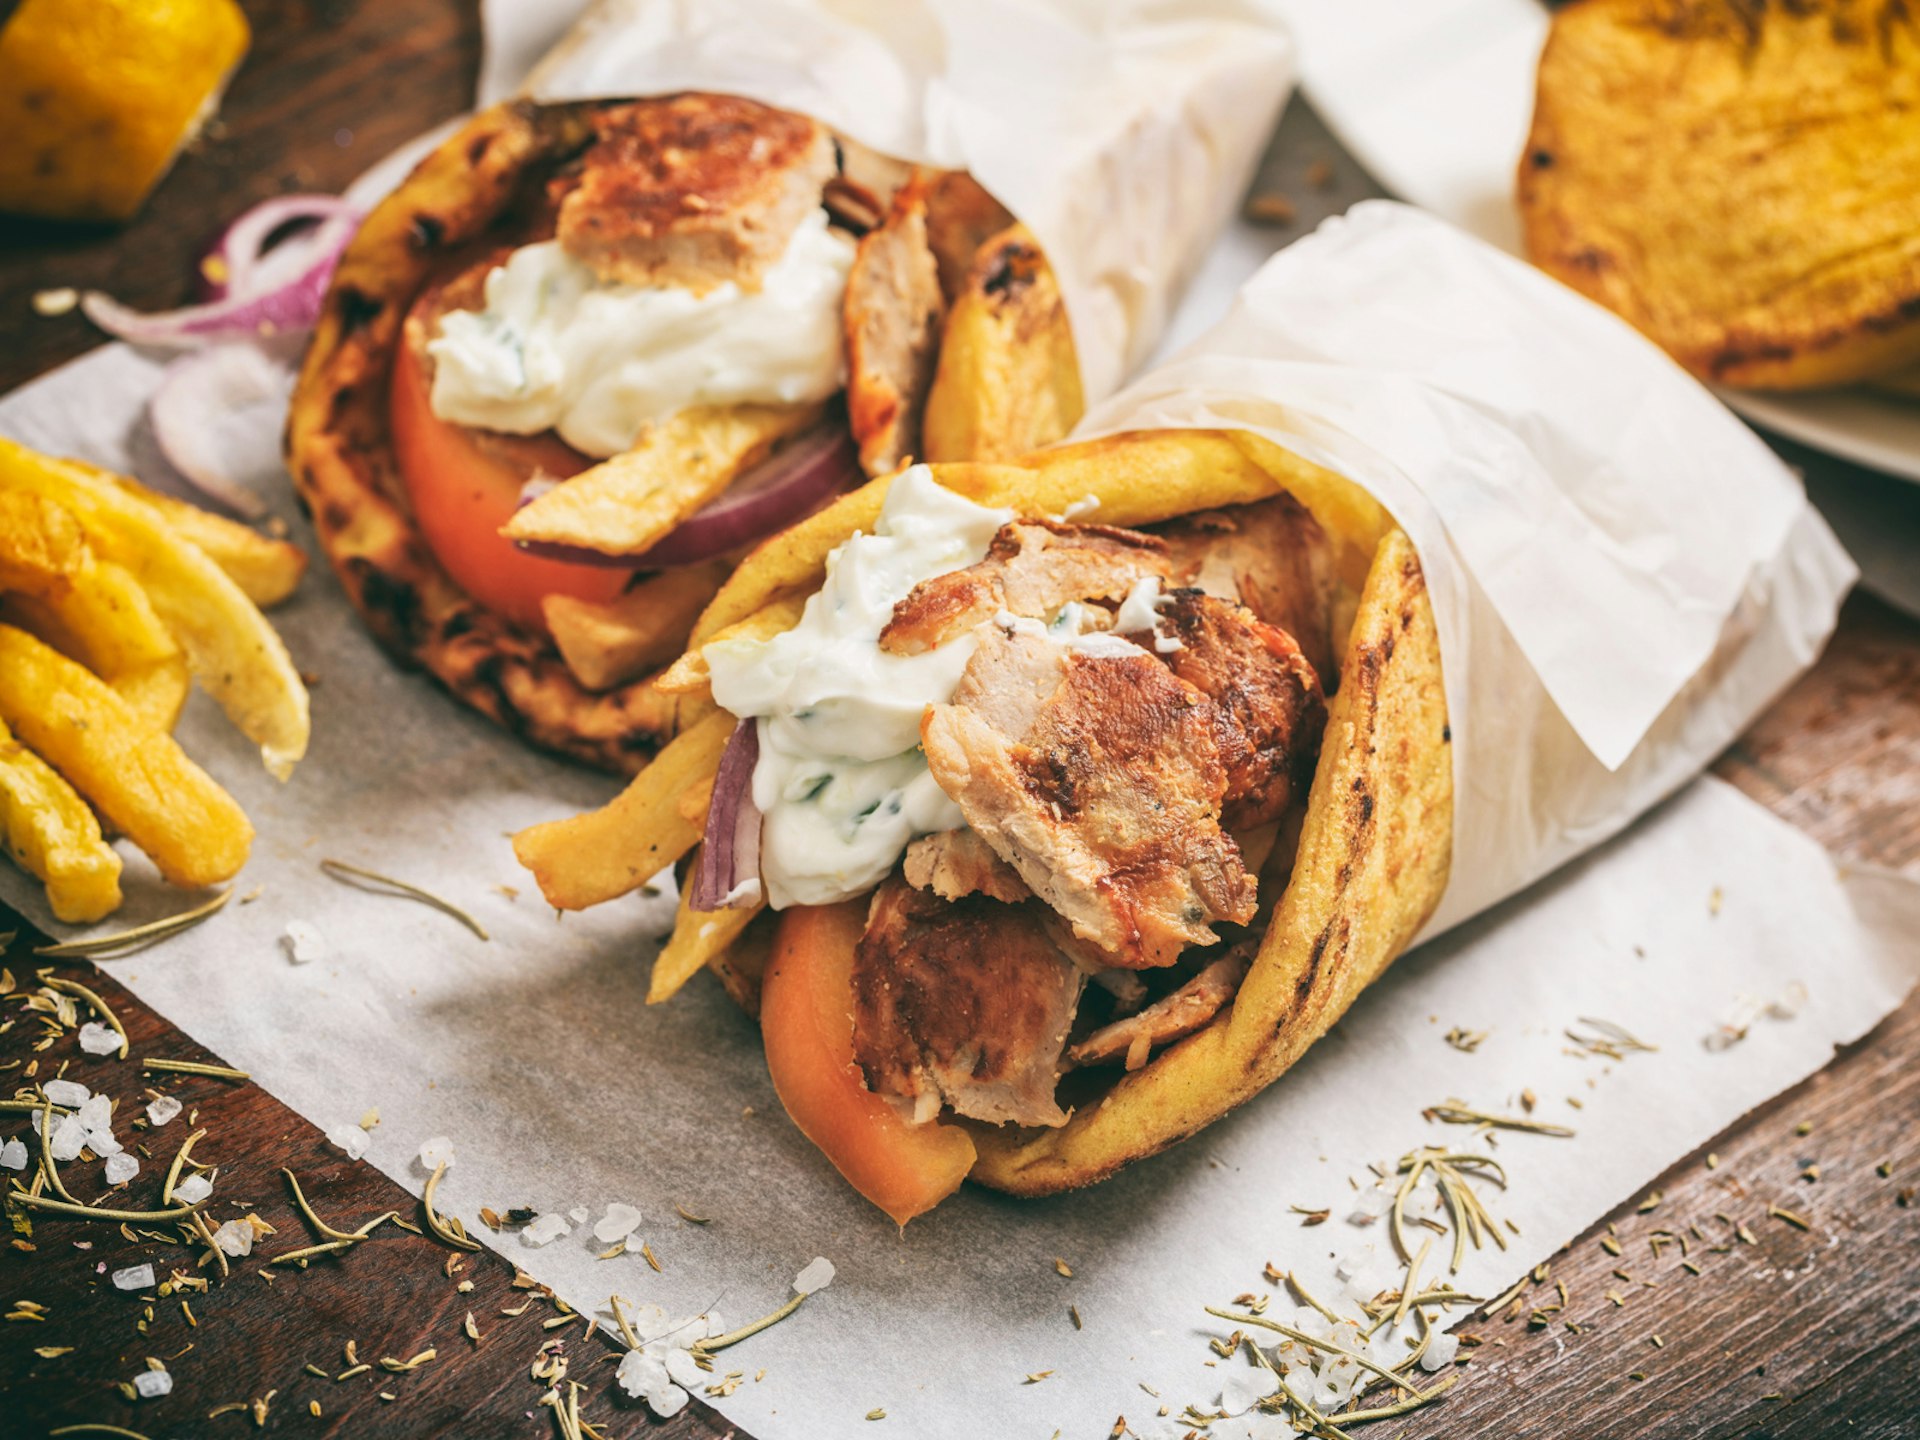 Gyros souvlaki wrapped in pita bread is the ultimate Greek snack on the go © rawf8 / Shutterstock